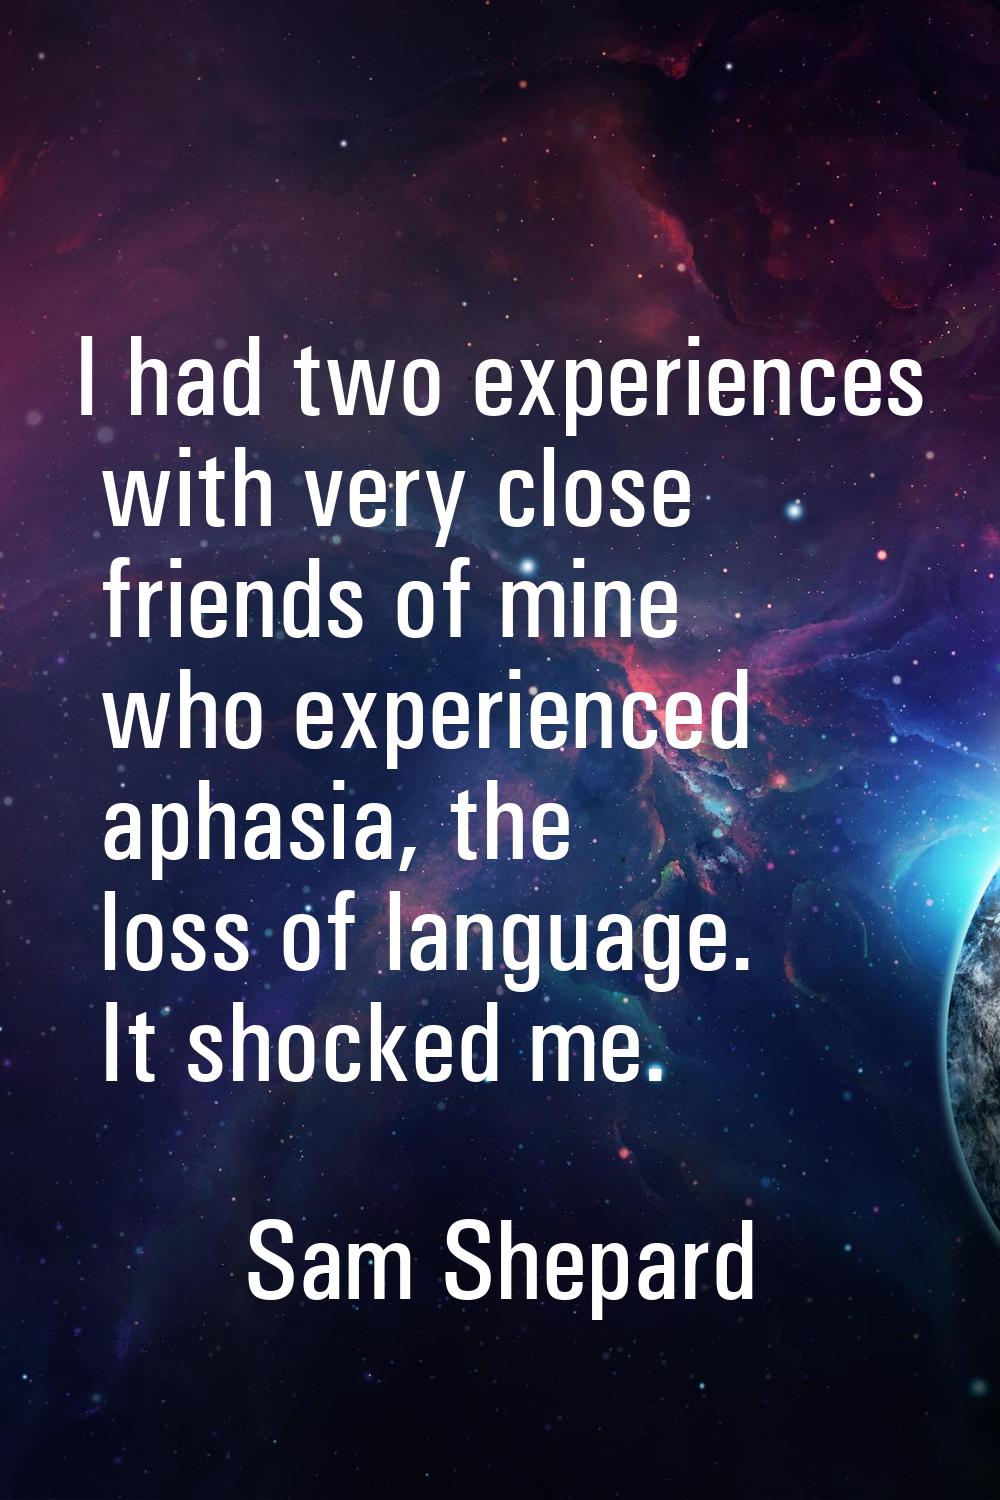 I had two experiences with very close friends of mine who experienced aphasia, the loss of language